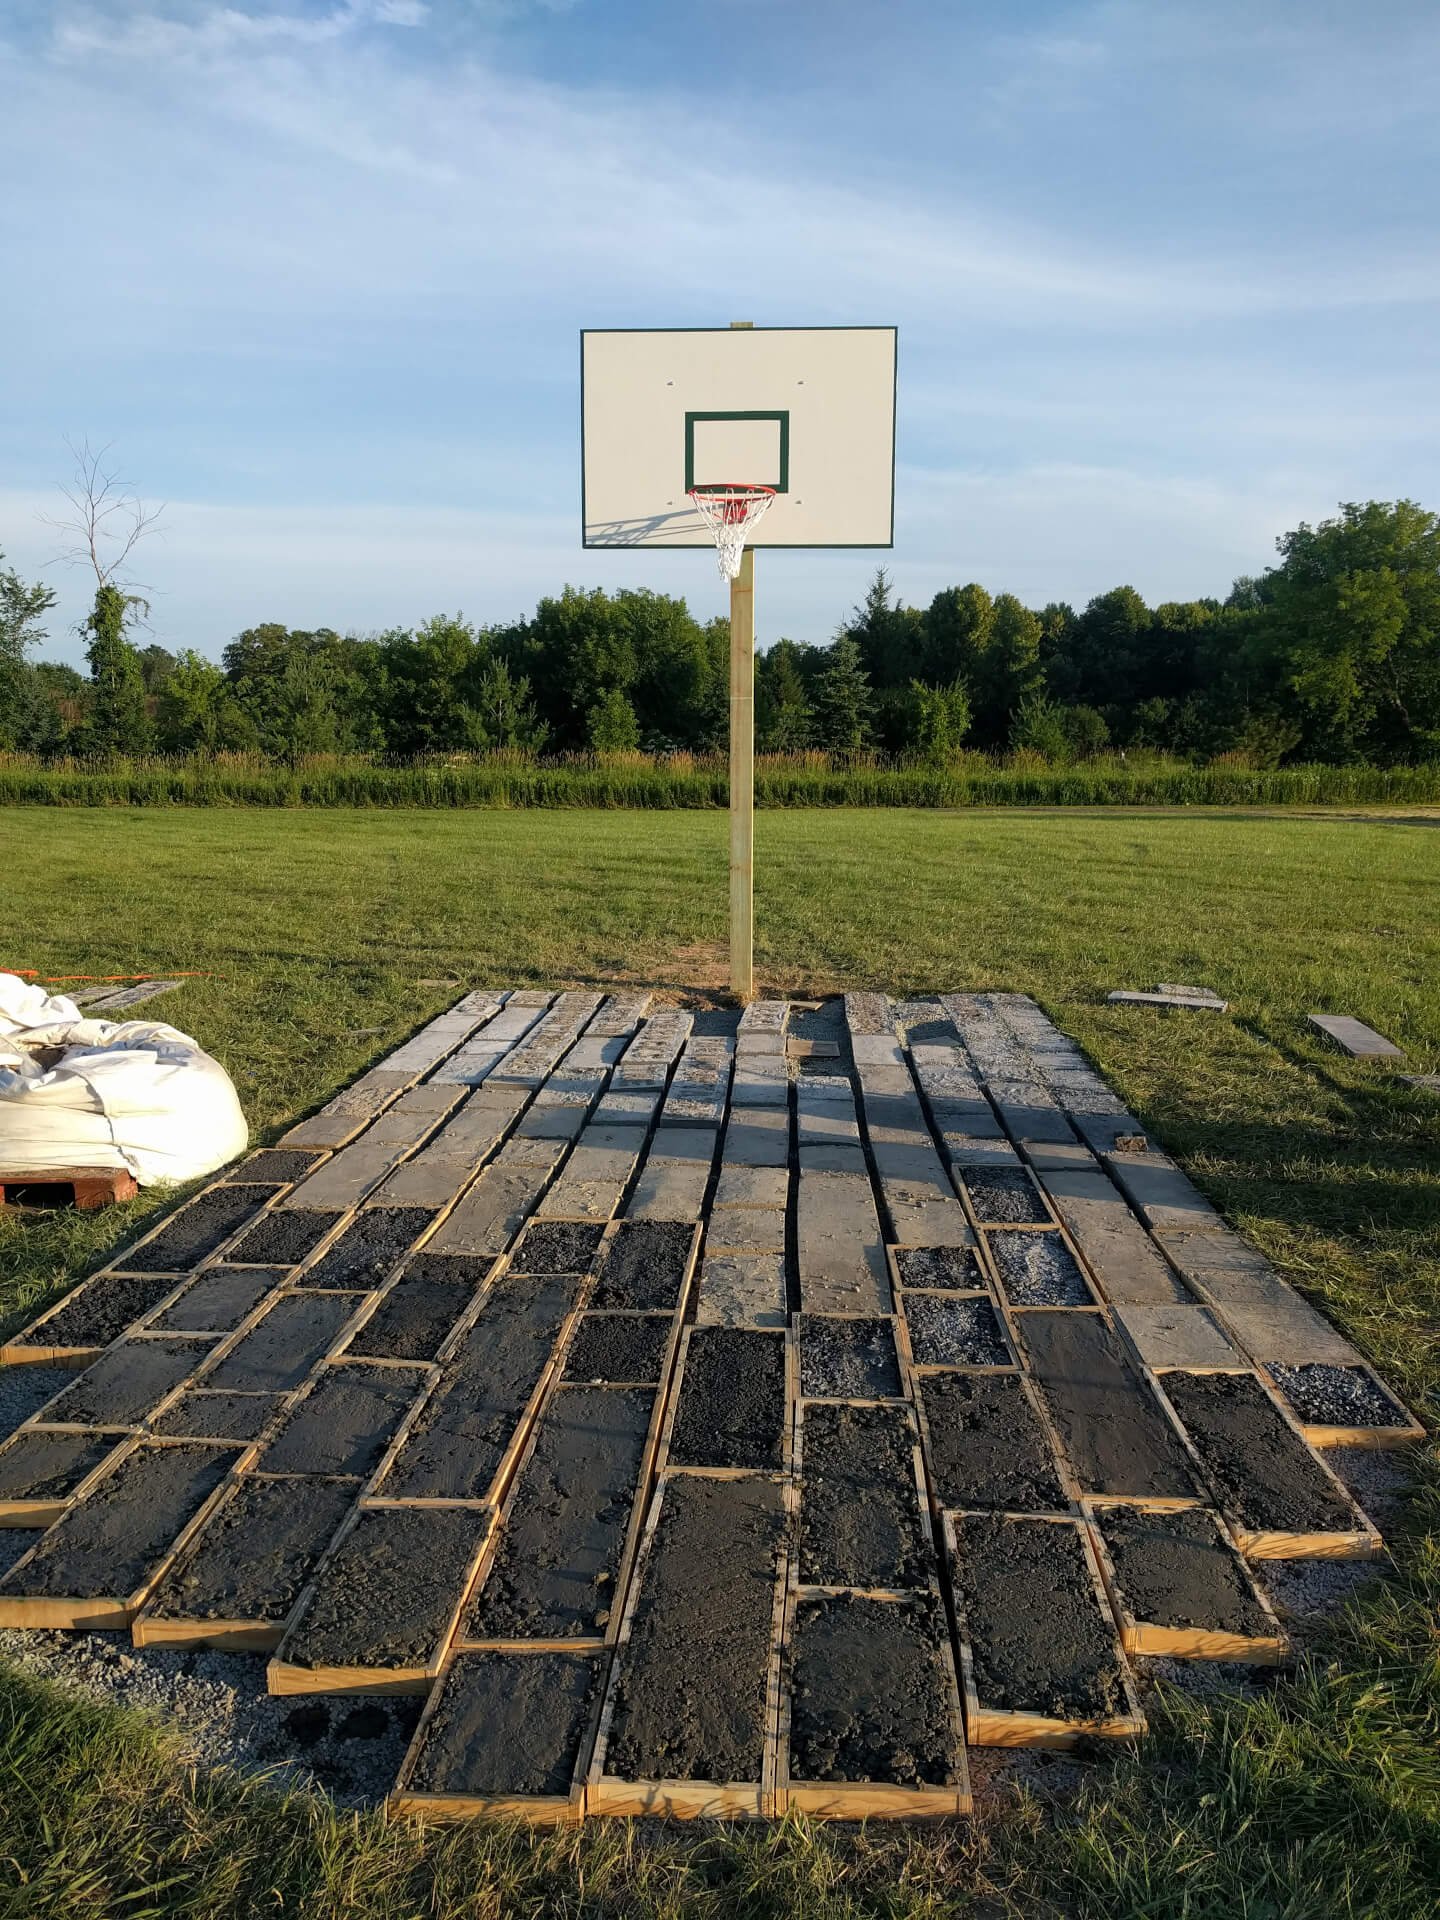 A green and white basketball backboard against a blue sky. Below concrete pavers are still in forms.